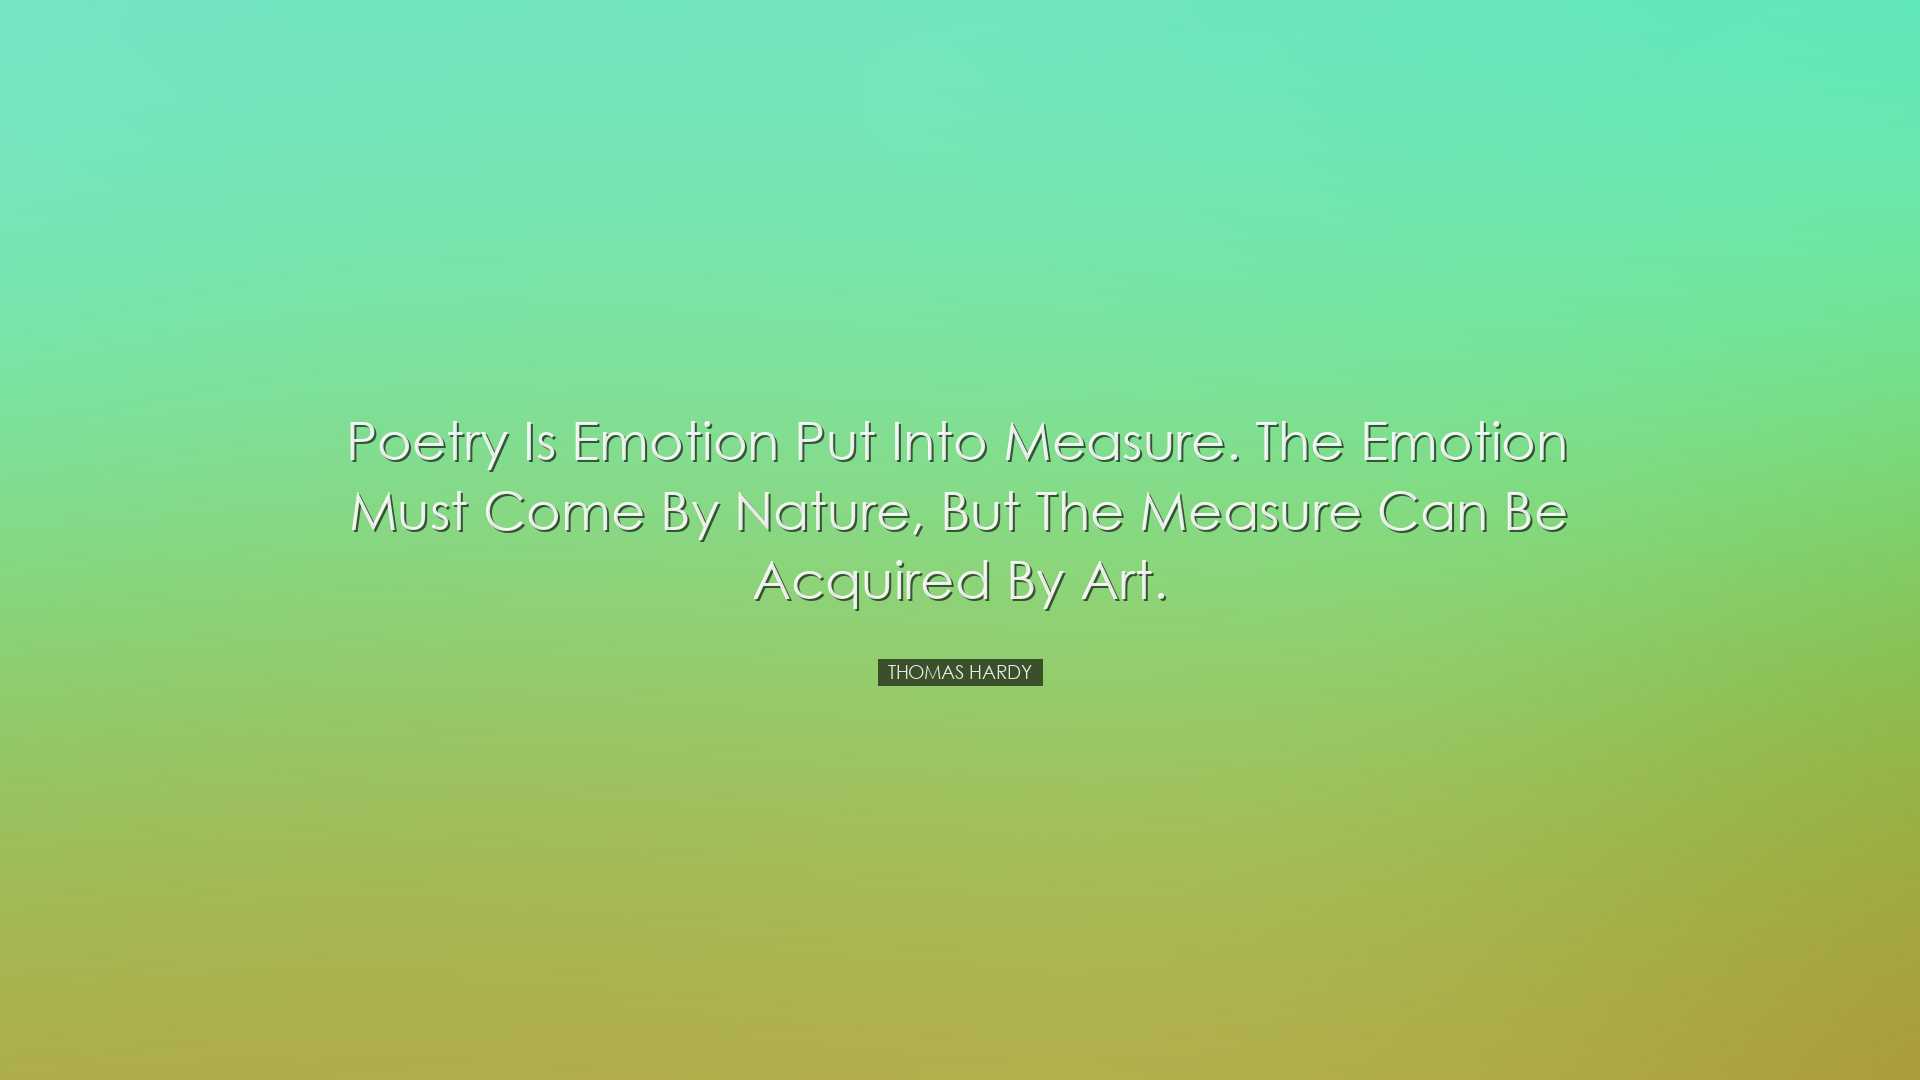 Poetry is emotion put into measure. The emotion must come by natur